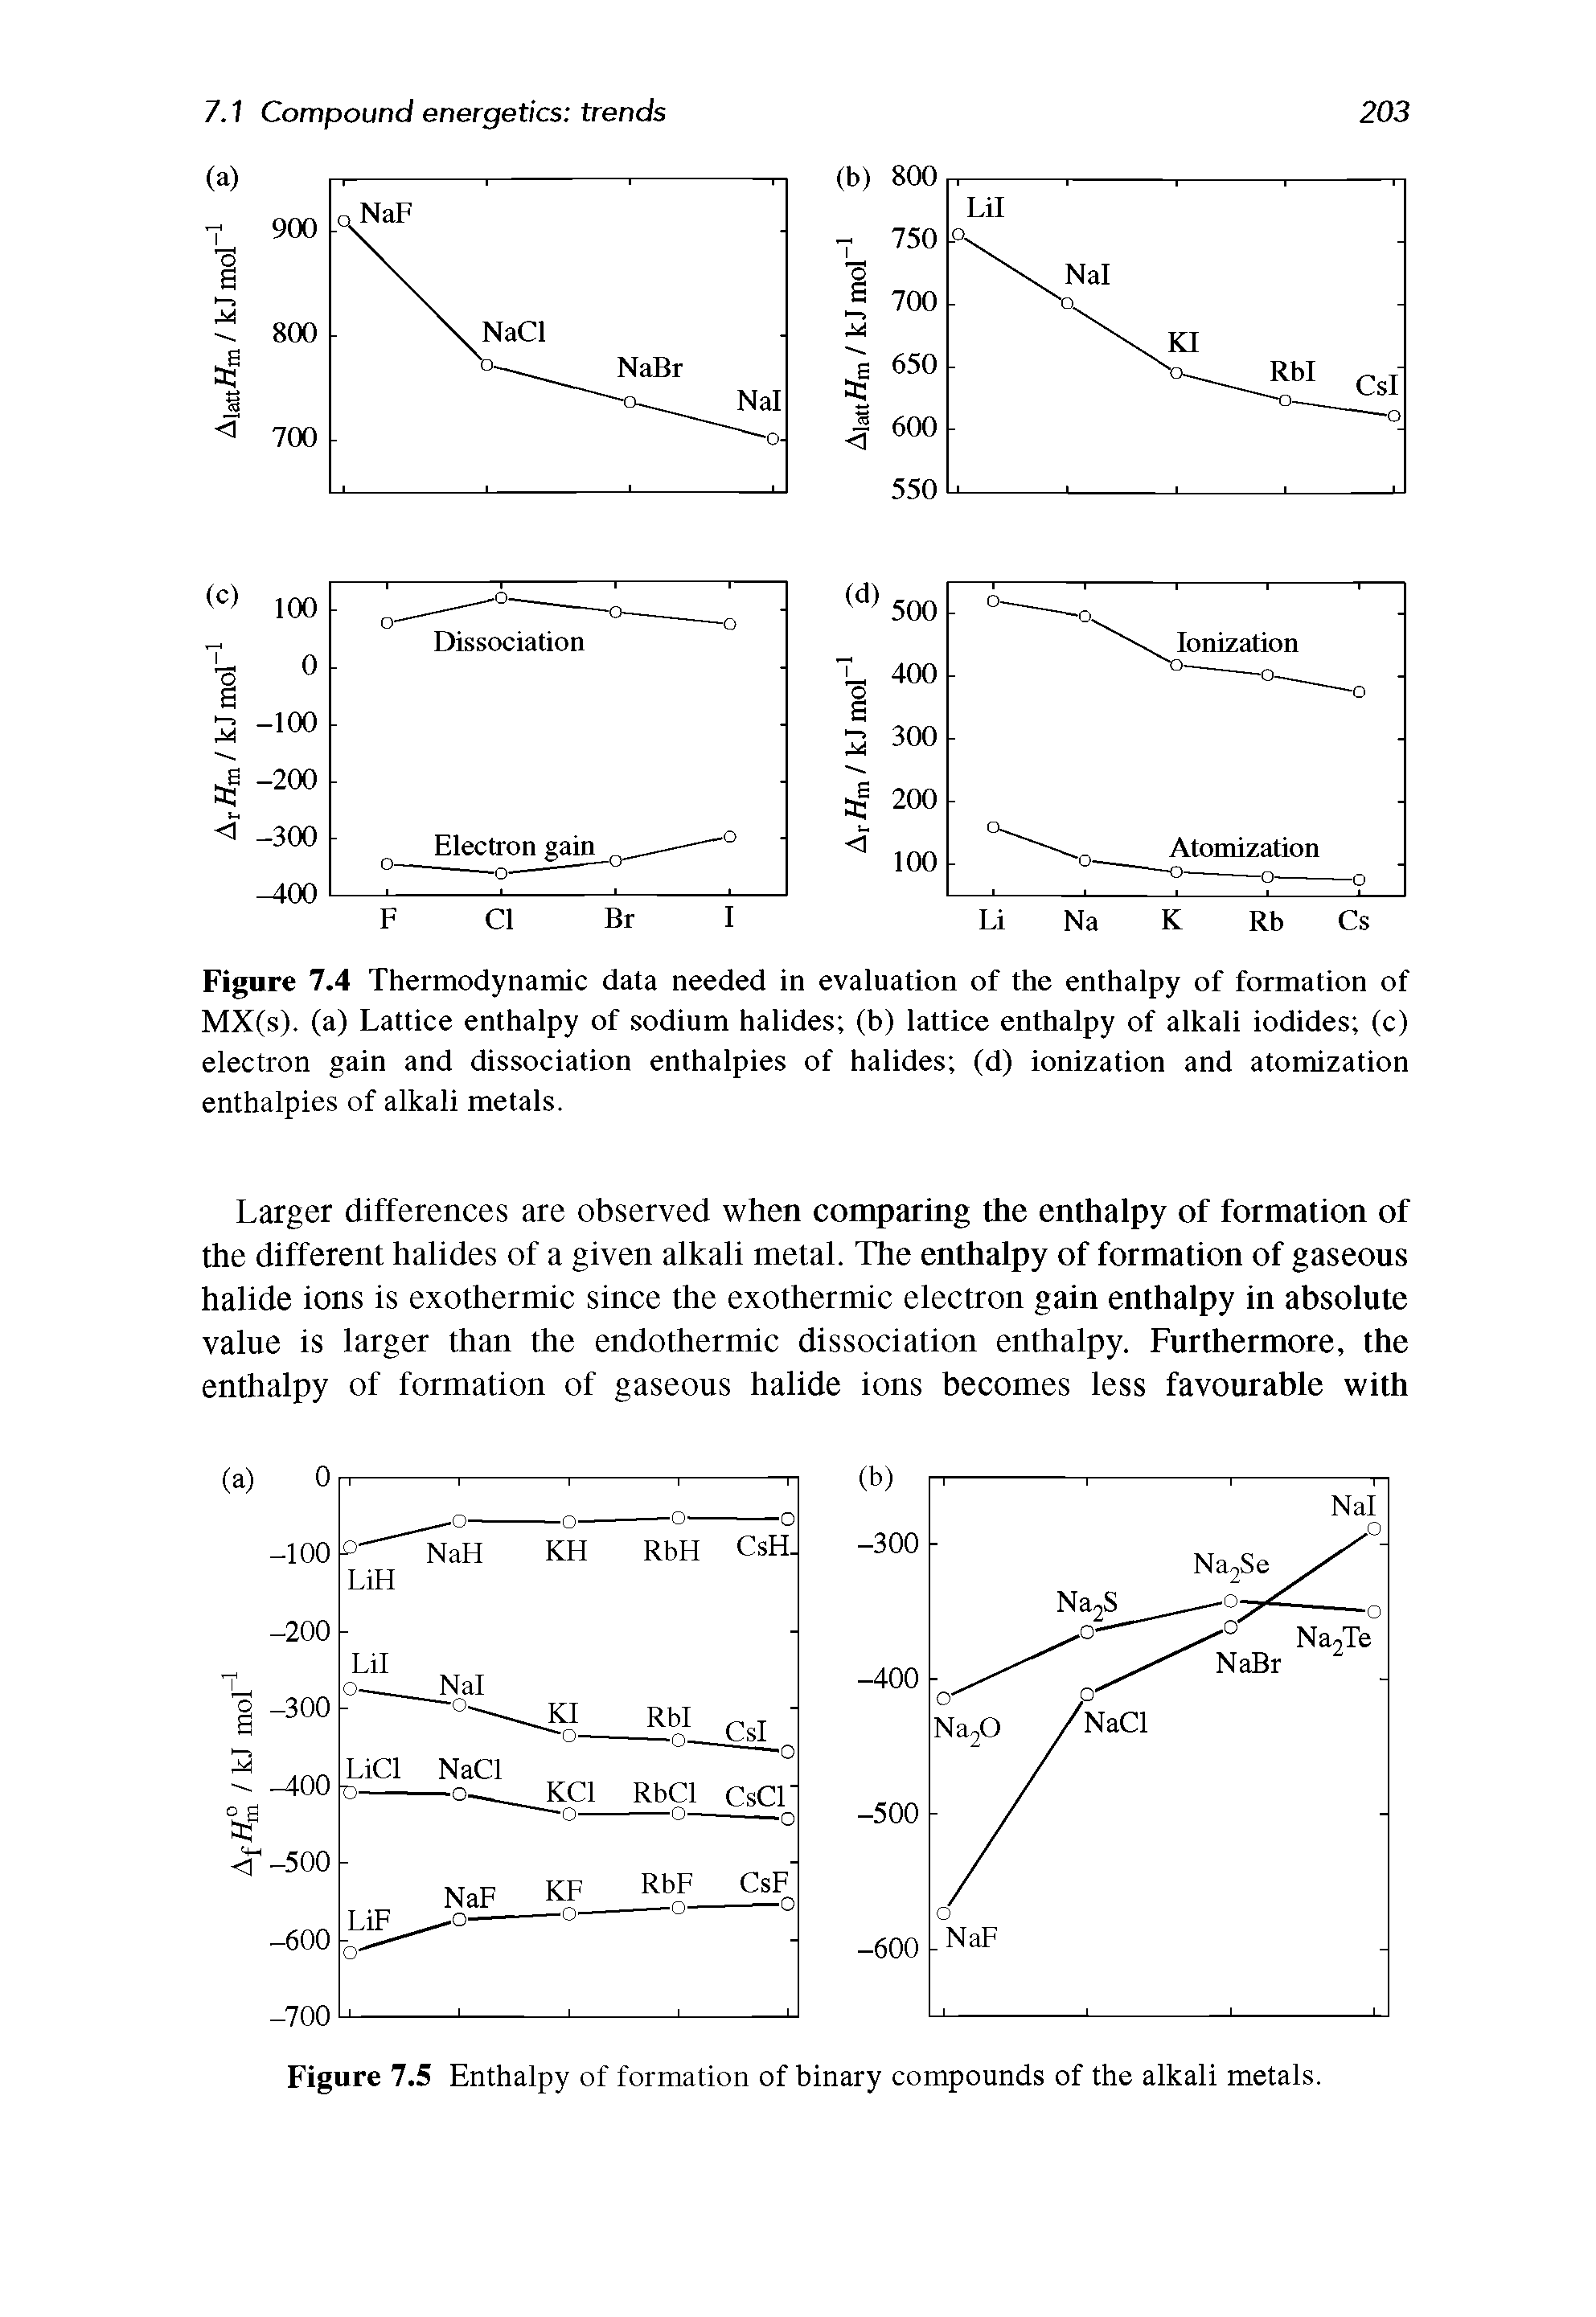 Figure 7.4 Thermodynamic data needed in evaluation of the enthalpy of formation of MX(s). (a) Lattice enthalpy of sodium halides (b) lattice enthalpy of alkali iodides (c) electron gain and dissociation enthalpies of halides (d) ionization and atomization enthalpies of alkali metals.